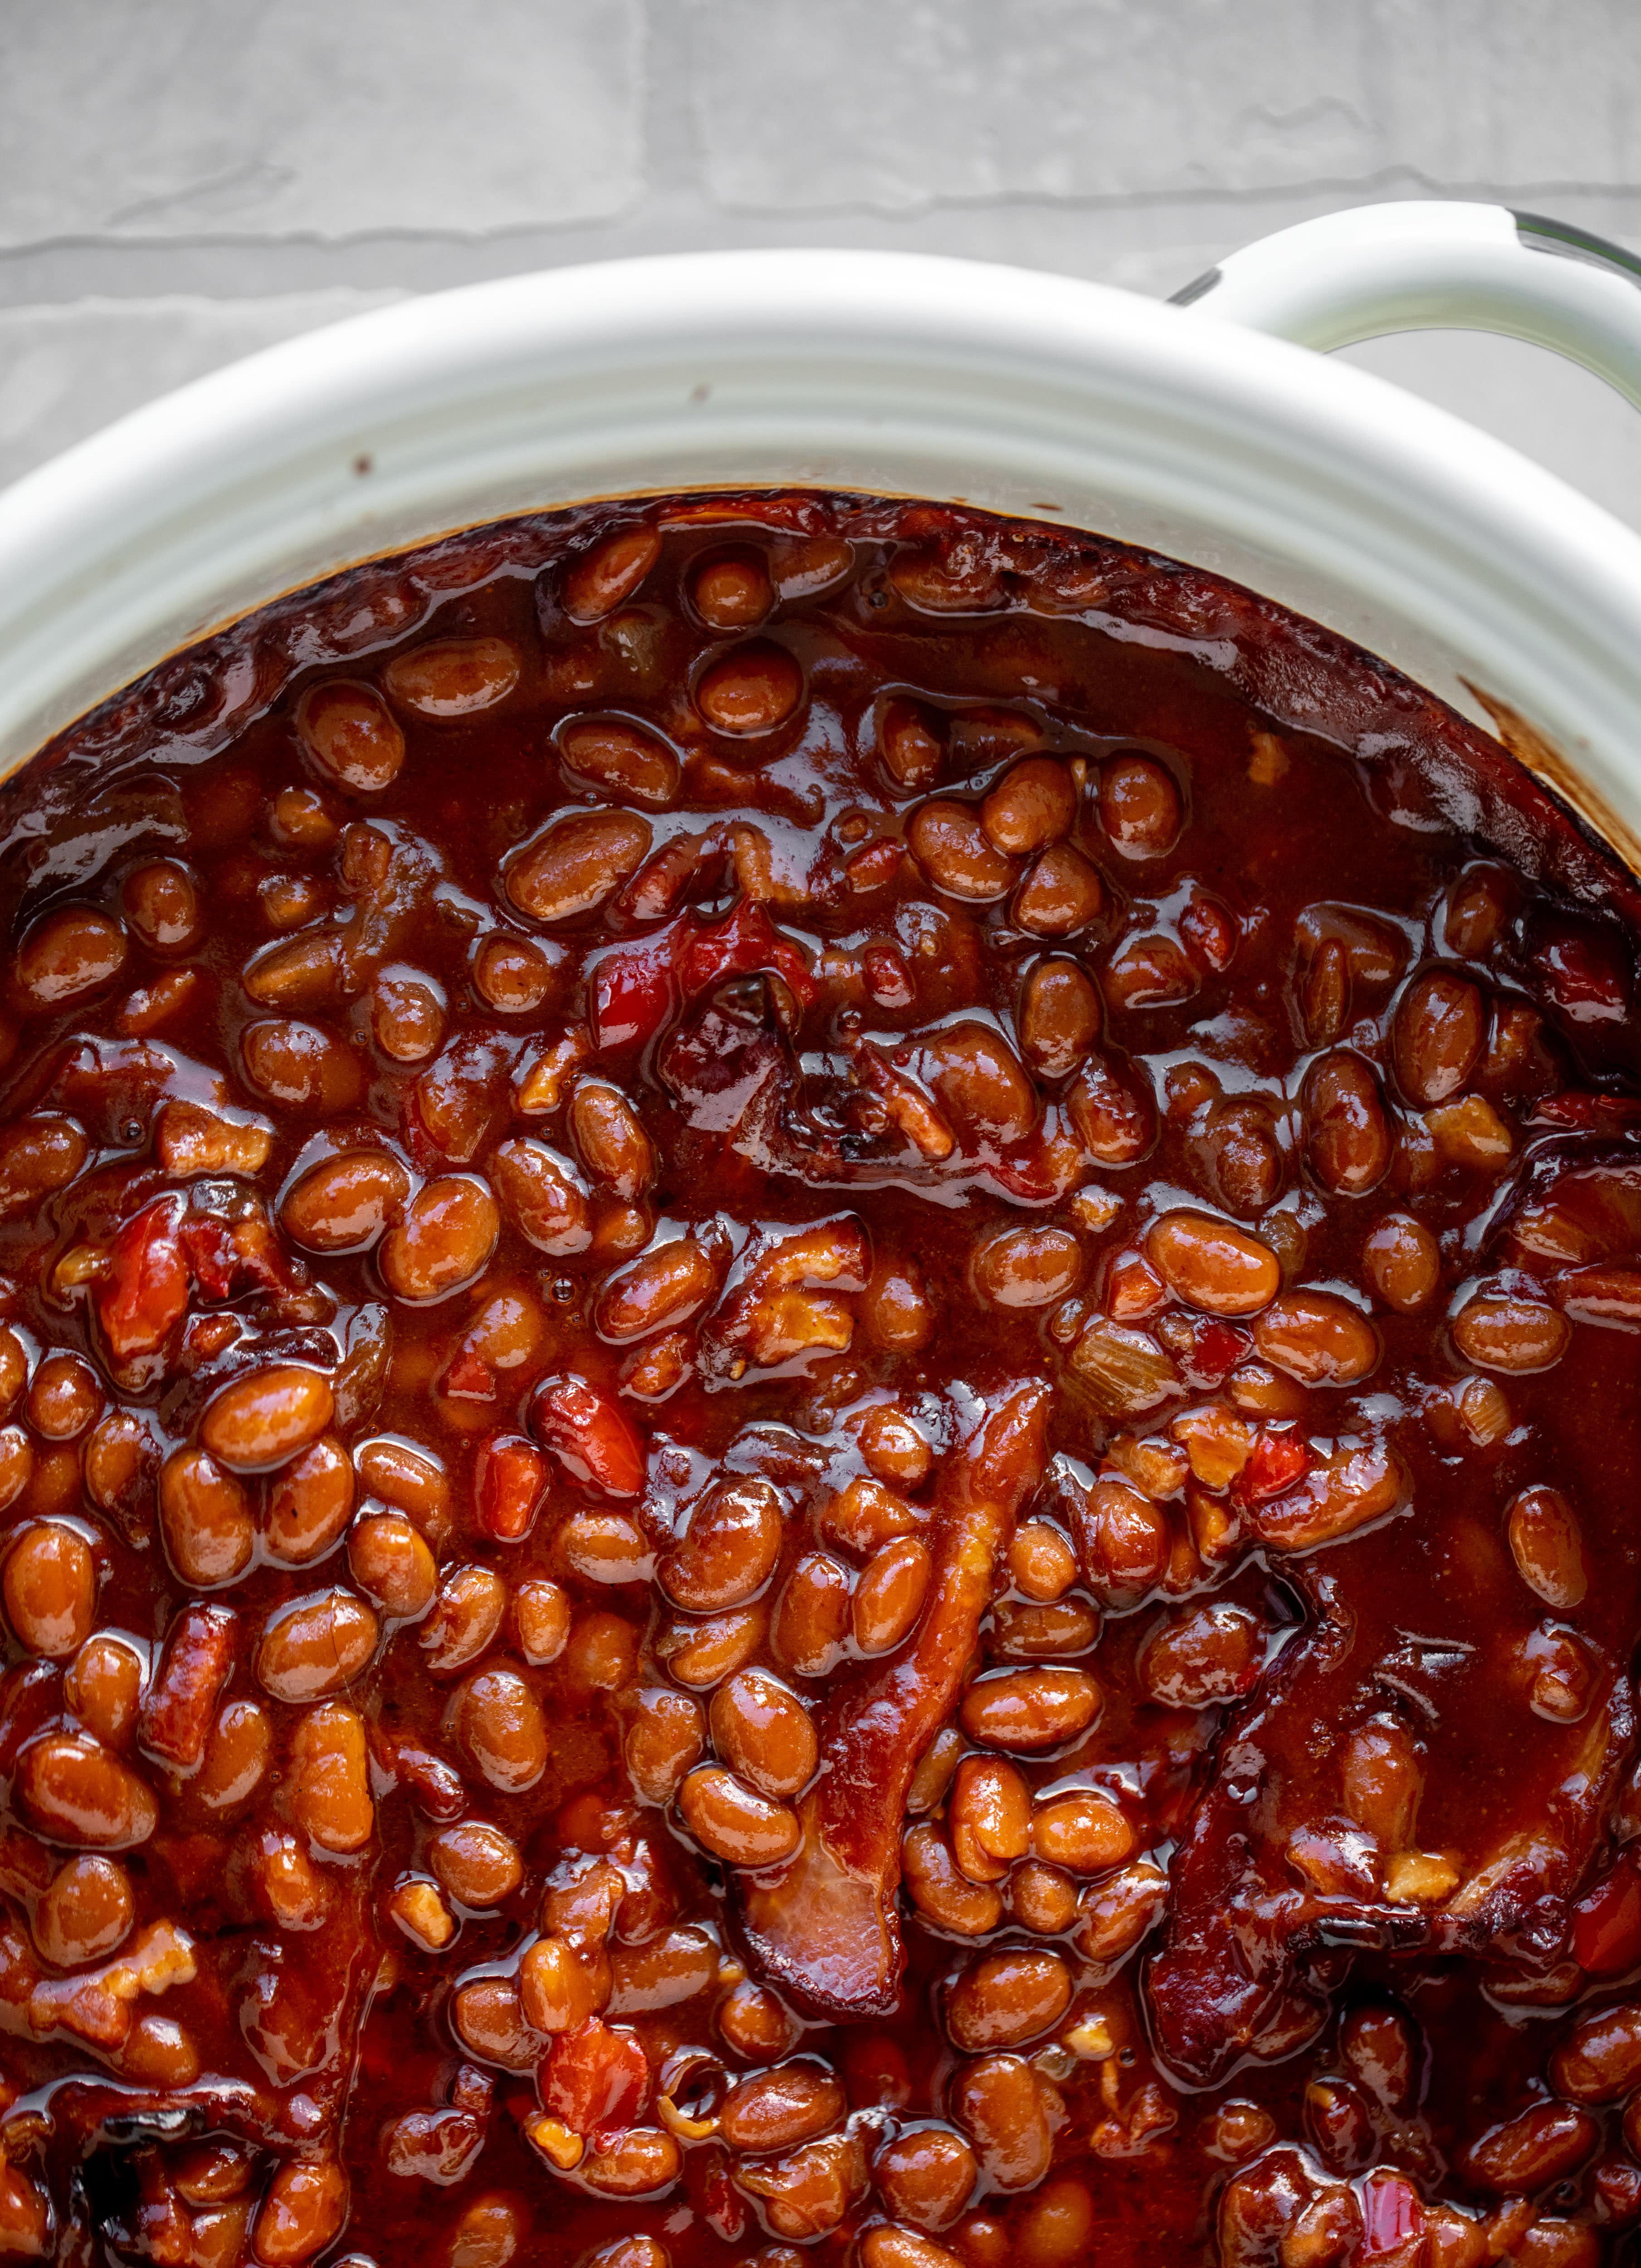 Baked Beans Recipe - Our Favorite Baked Beans Recipe